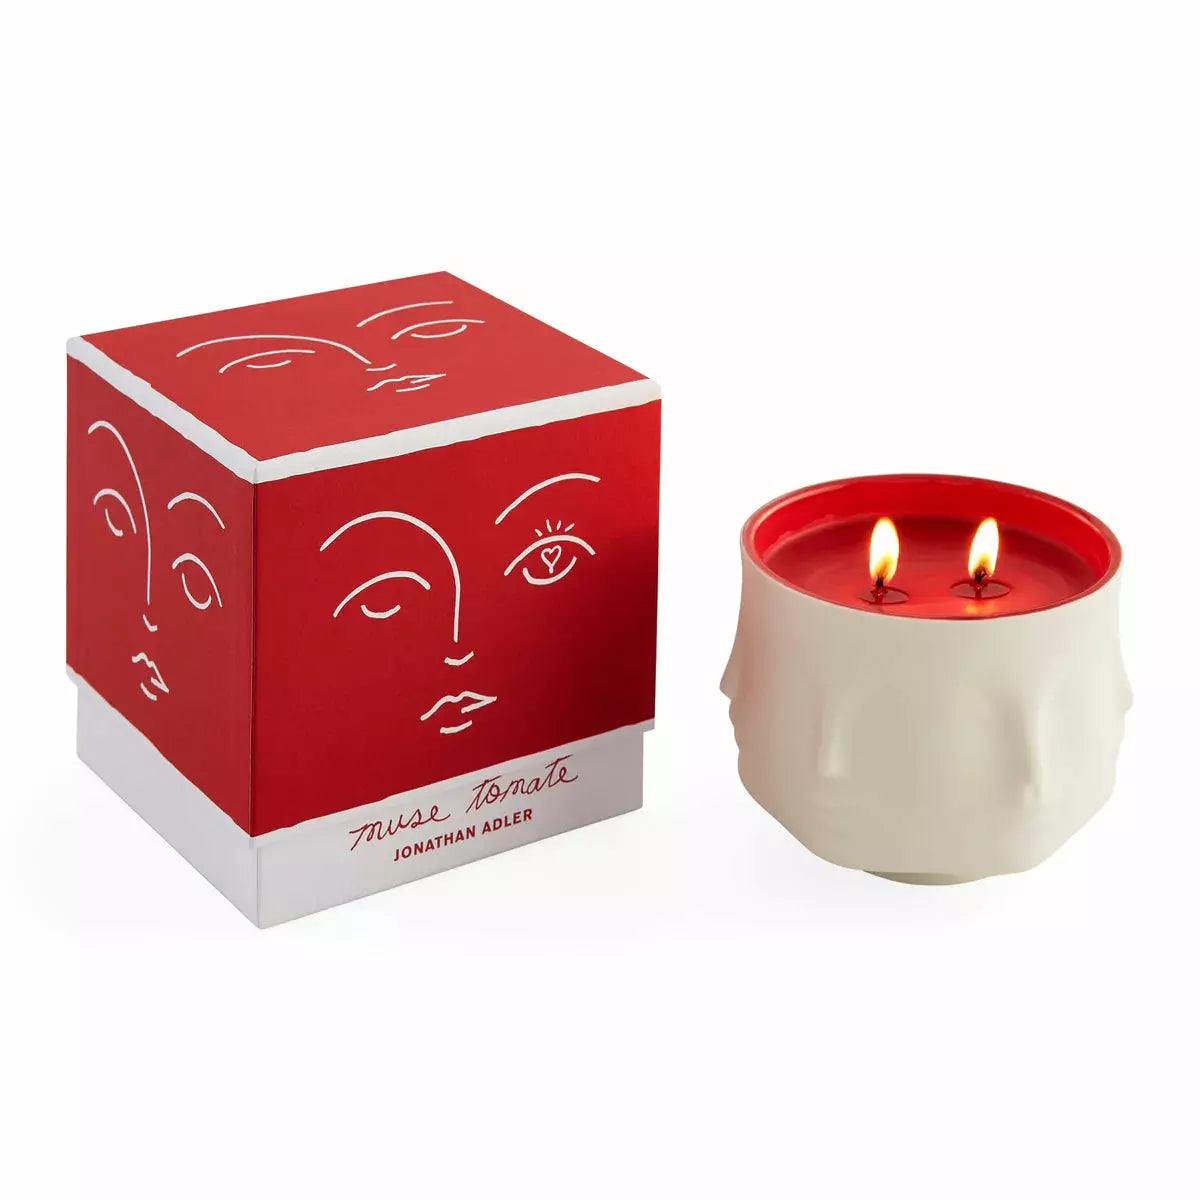 MUSE COULEUR TOMATE CANDLE